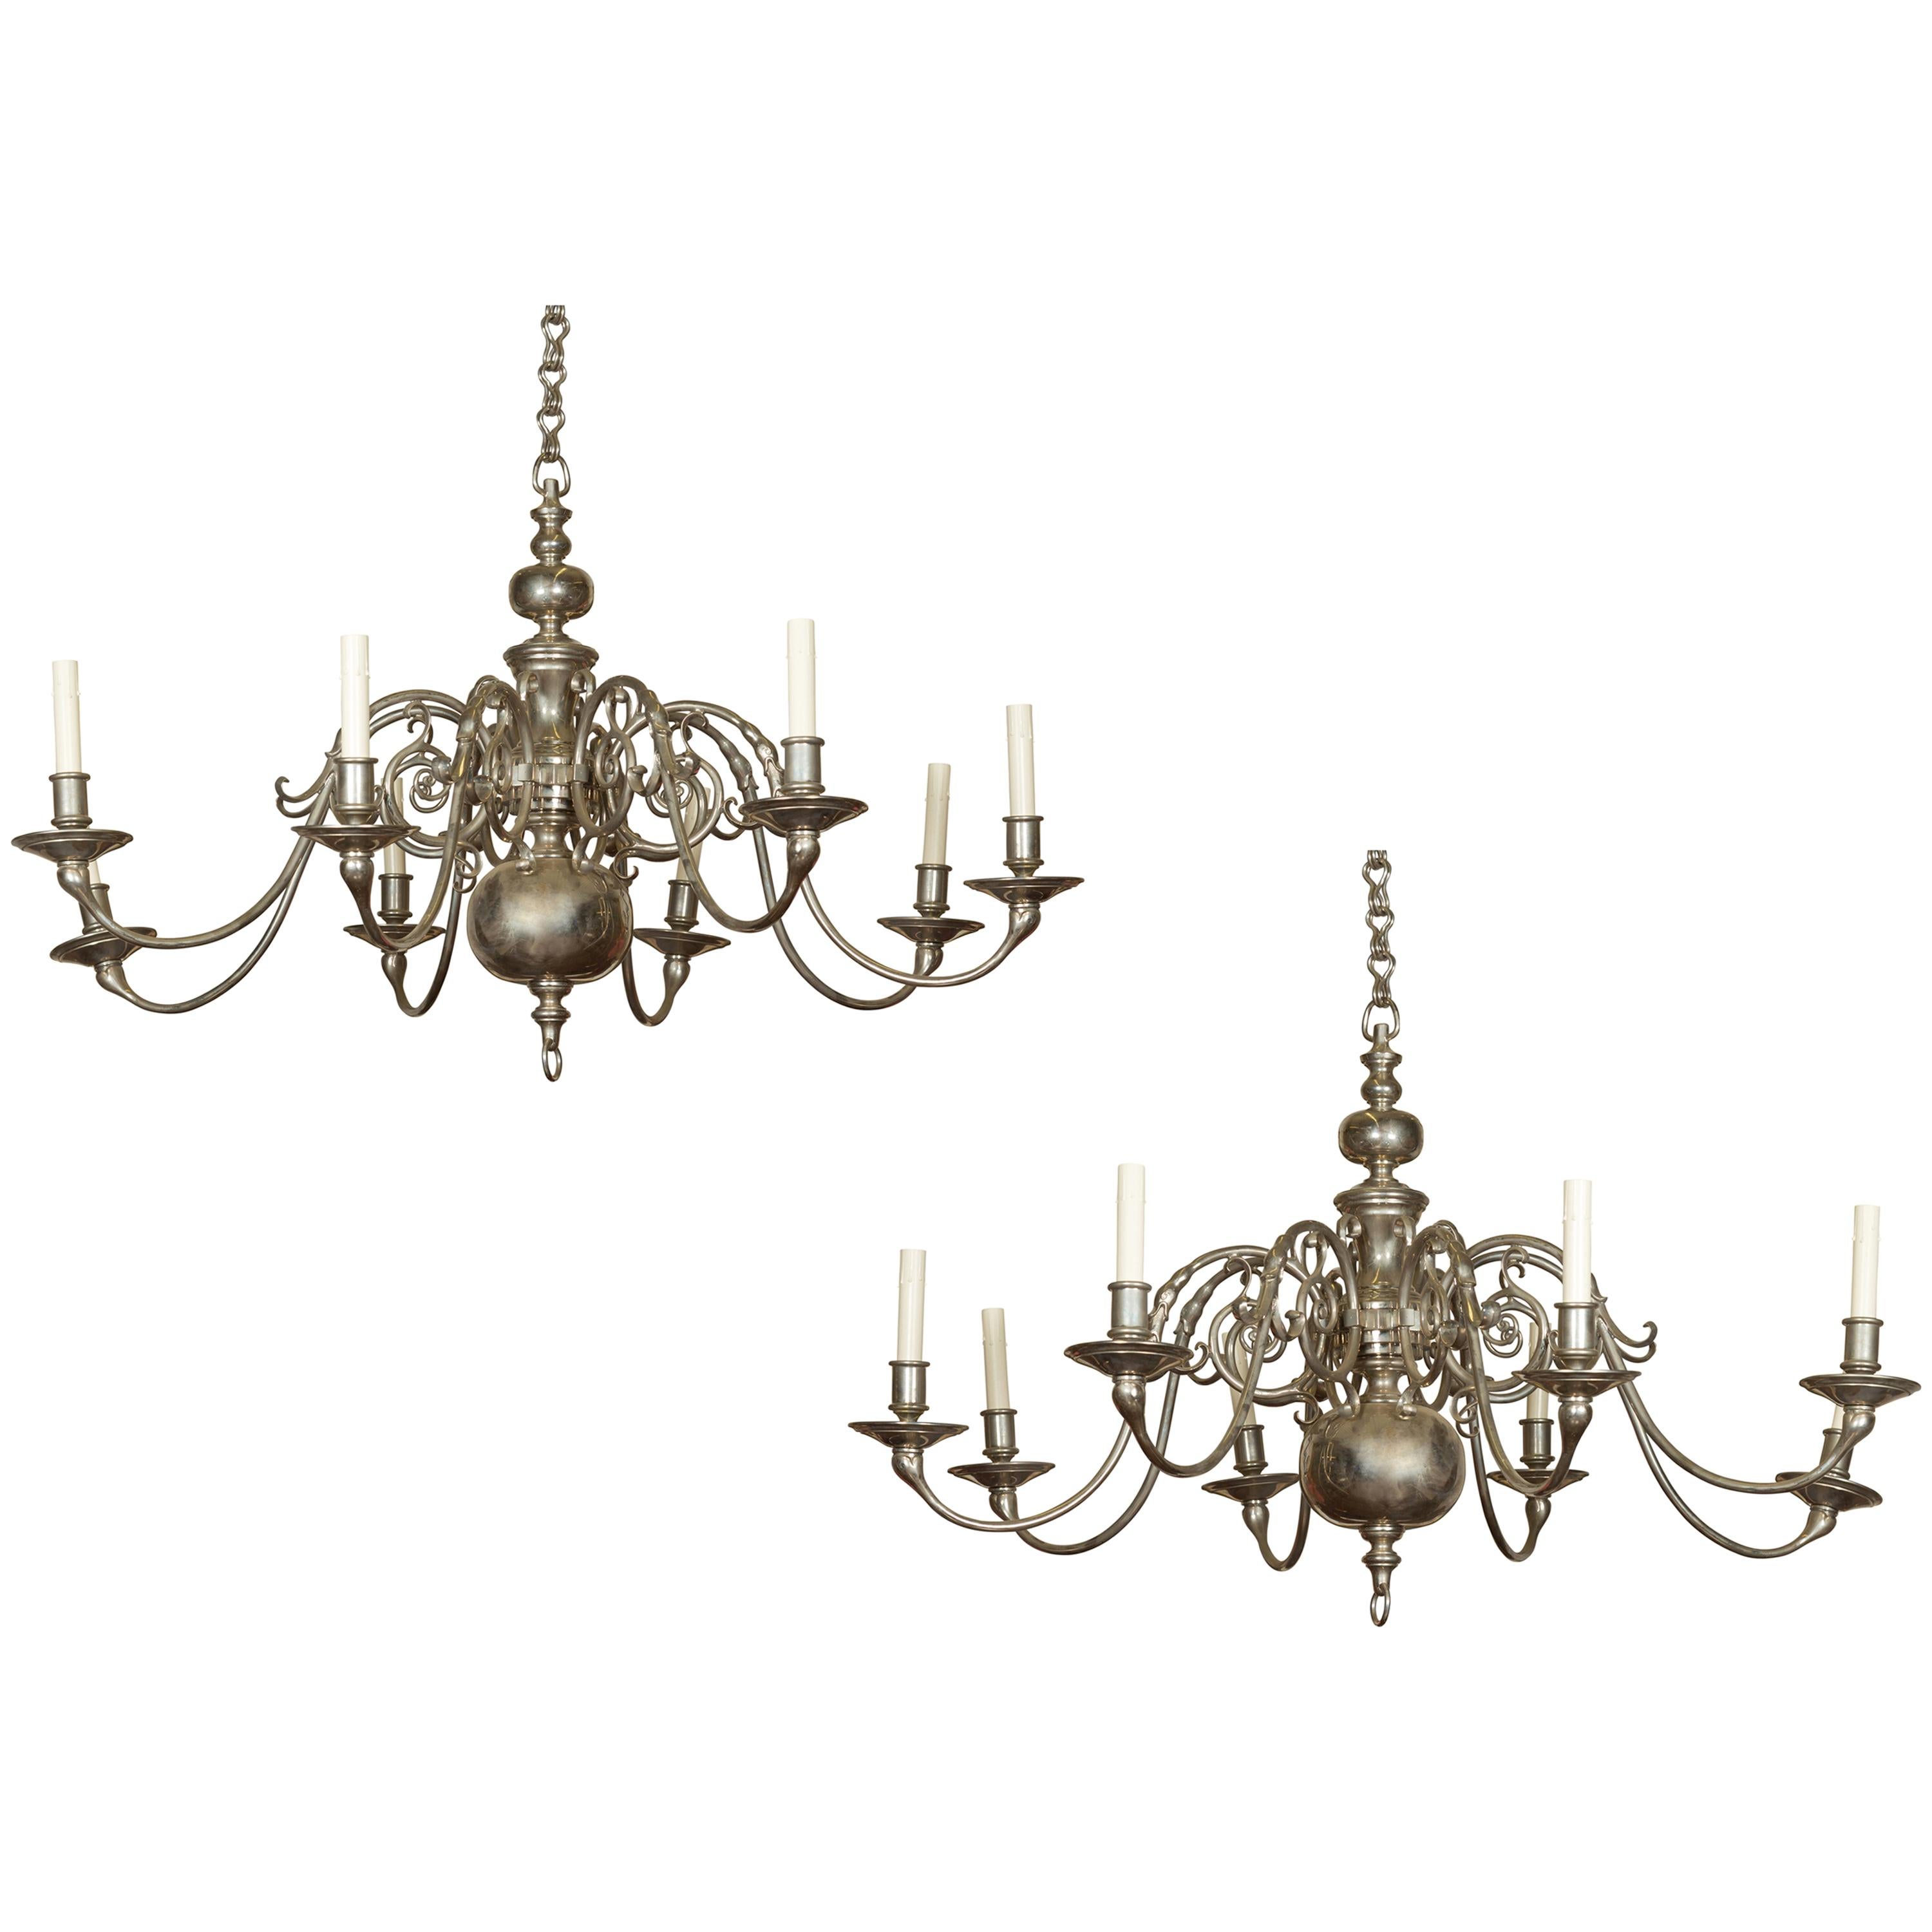 Vintage Pair of English Silver Plated Eight-Light Chandeliers, circa 1950